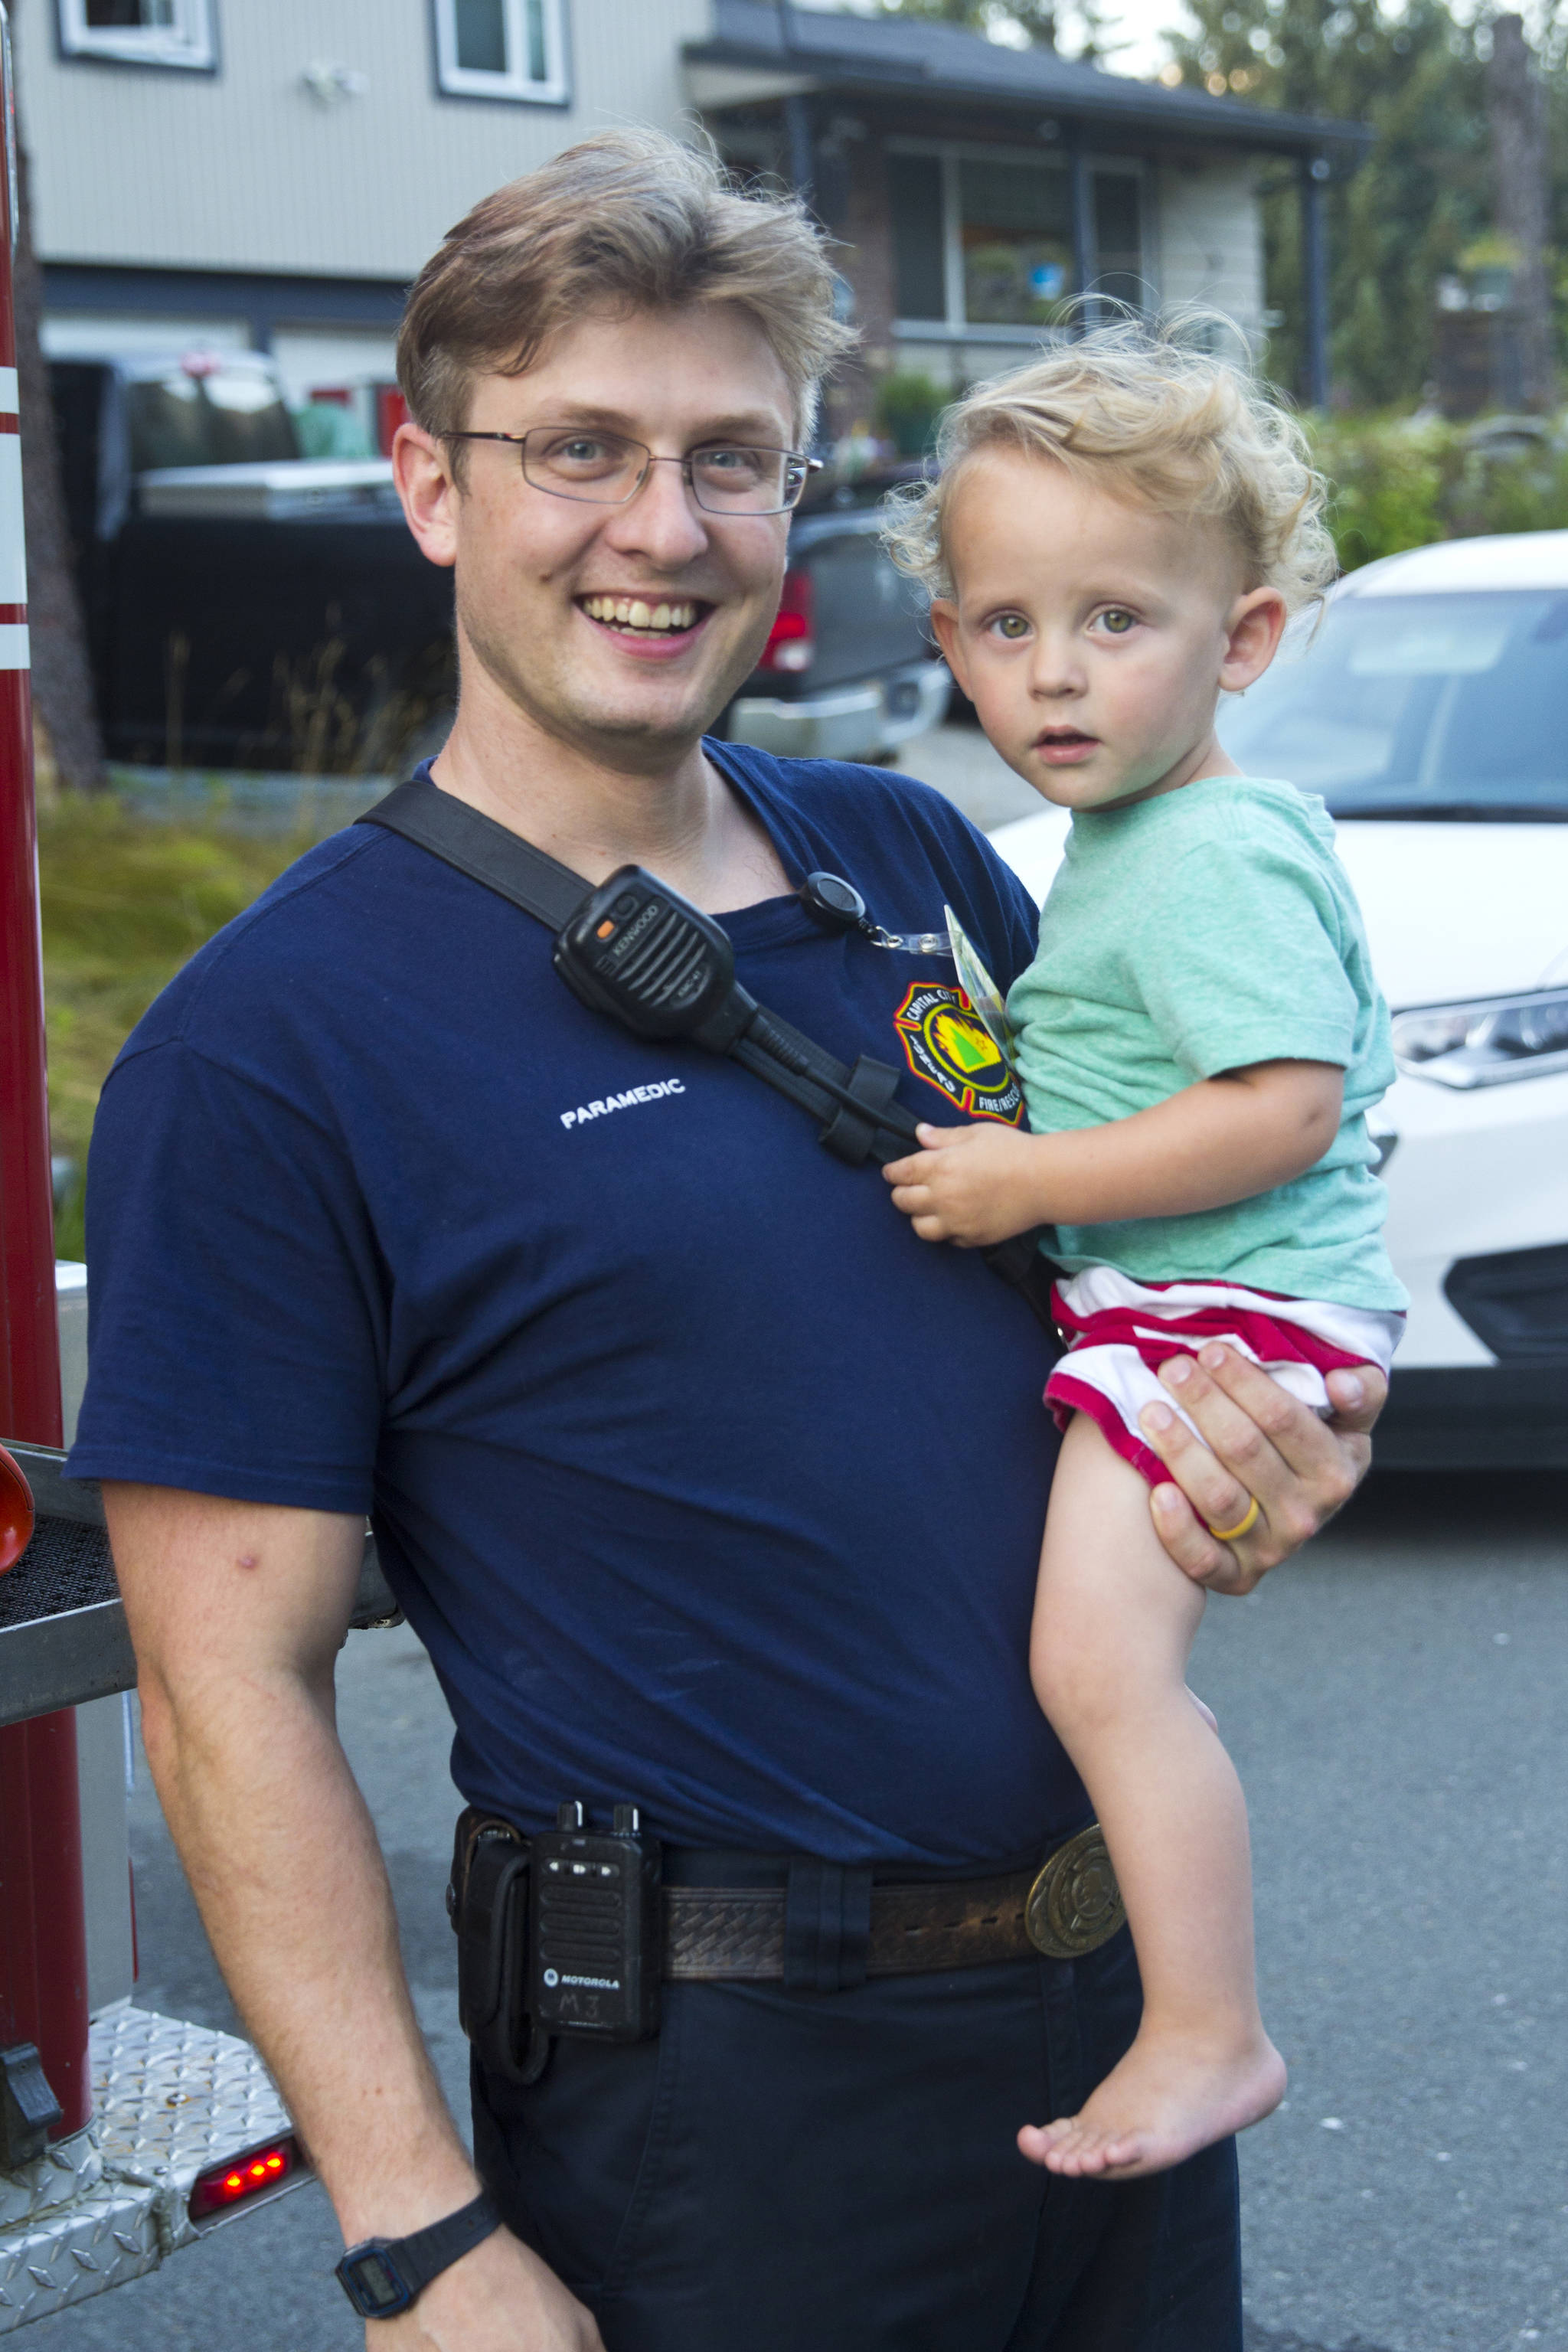 Travis Larsen, paramedic with Capital City Fire/Rescue, poses with his child during National Night Out, Aug. 6, 2019. (Michael S. Lockett | Juneau Empire)